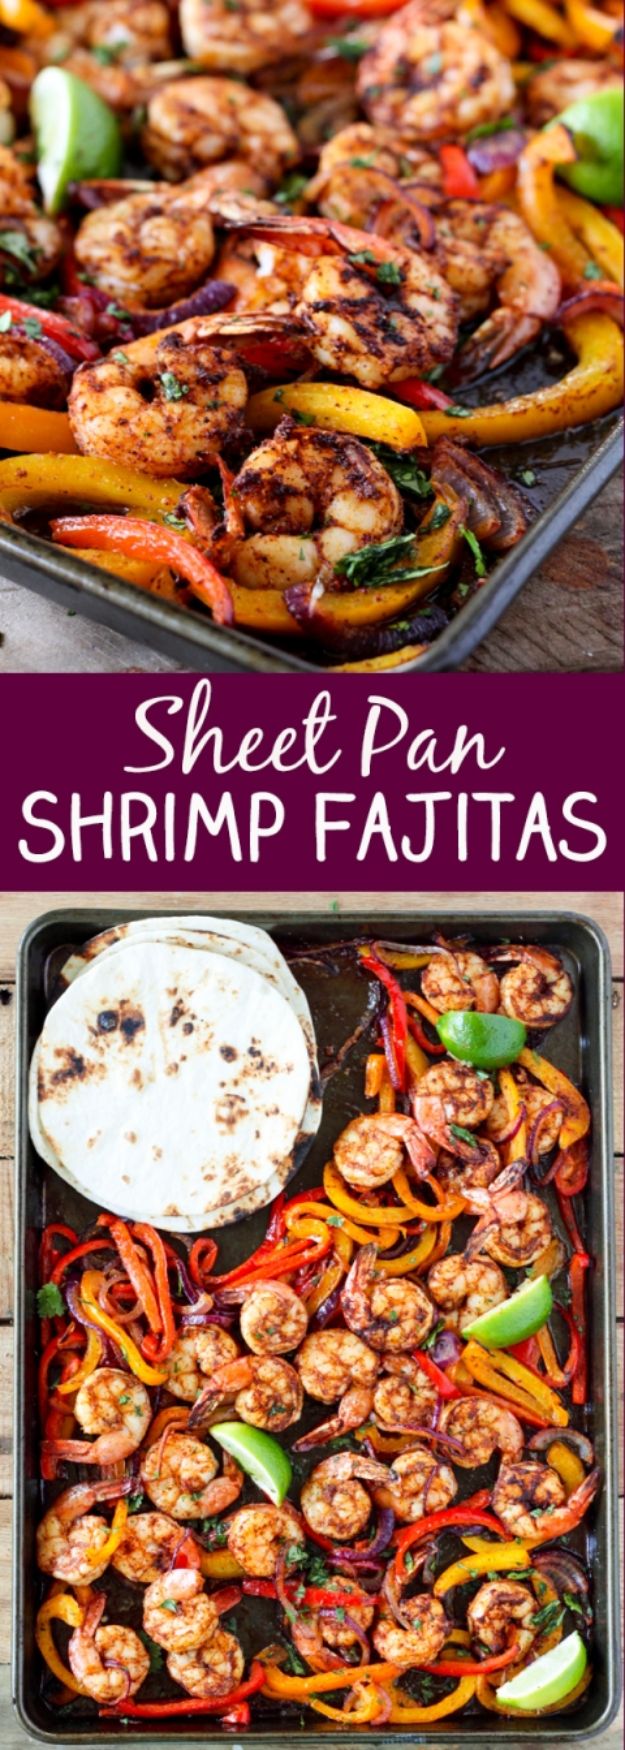 Best Lowfat Recipes - One Sheet Pan Shrimp Fajitas - Easy Low fat and Healthy Recipe Ideas For Eating Well and Dieting, Weight Loss - Quick Breakfasts, Lunch, Dinner, Snack and Desserts - Foods with Chicken, Vegetables, Salad, Low Carb, Beef, Egg, Gluten Free #lowfatrecipes 